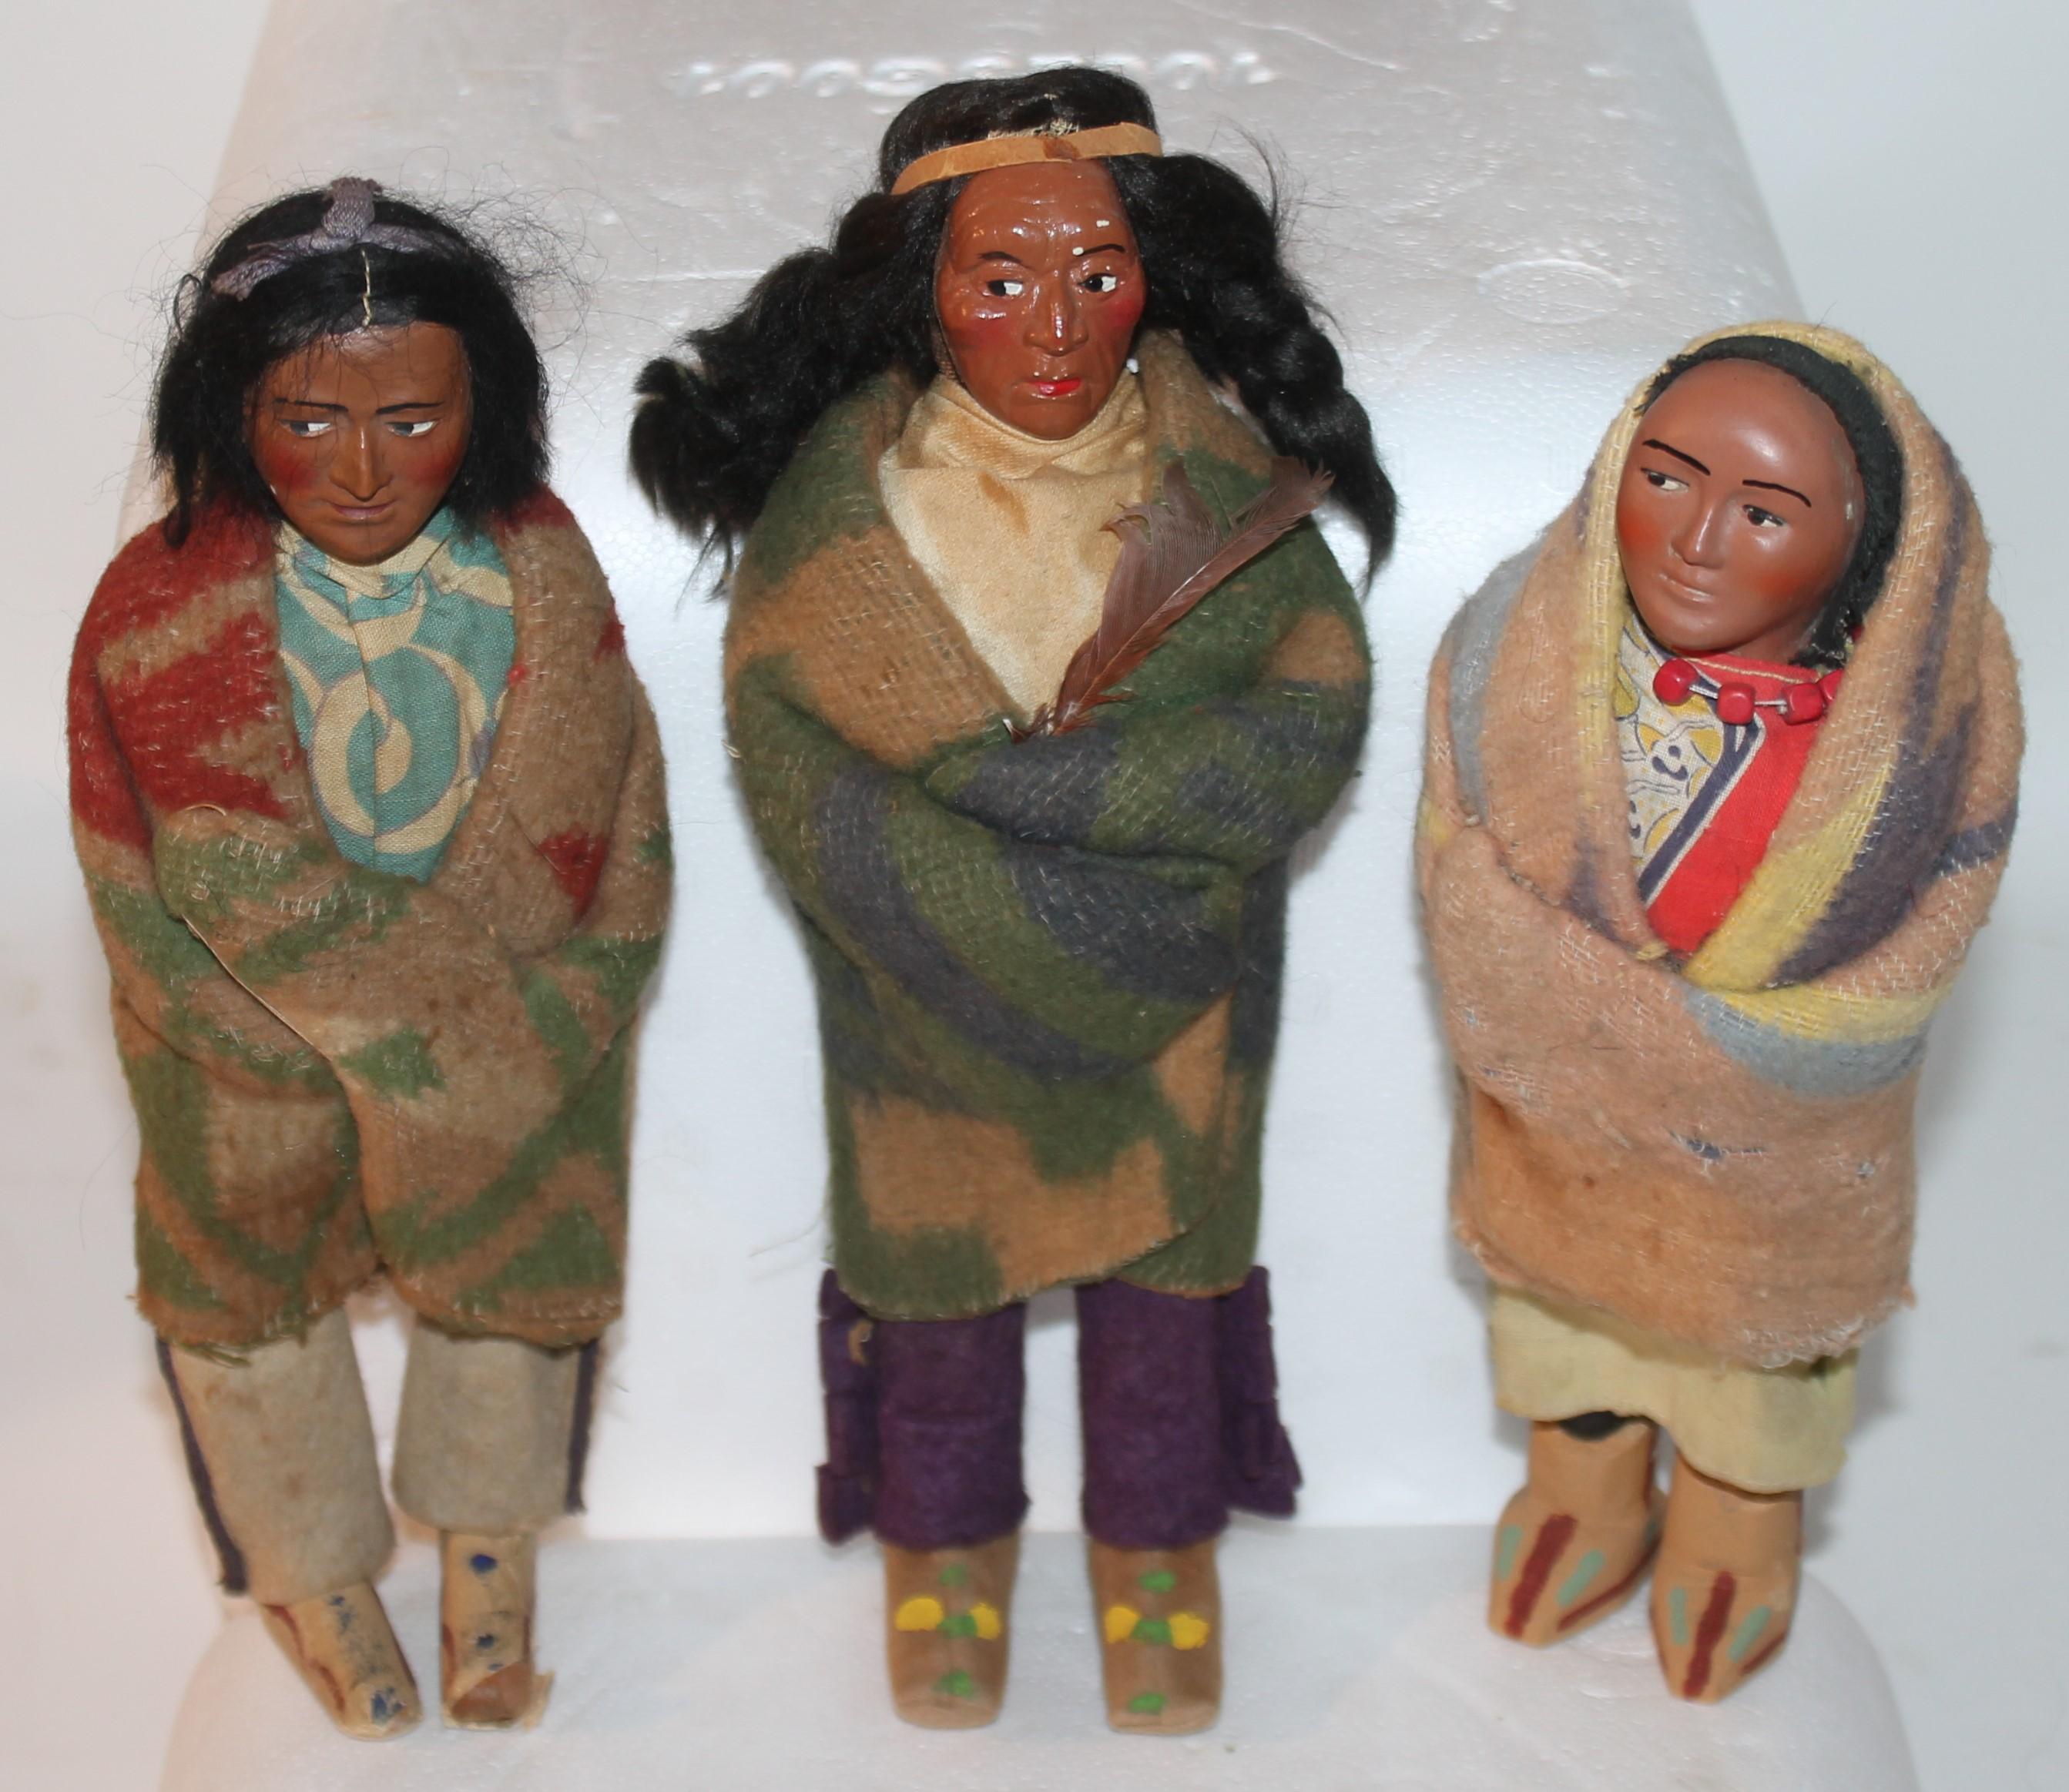 Set of four 1930's - 40's Skookum Dolls. The dolls are highly collectable. Each Doll has real hair and is wearing an indian design Beacon blankets.
largest measures 10.5 tall x 3.5 wide
smallest measures - 9 tall x 3 wide